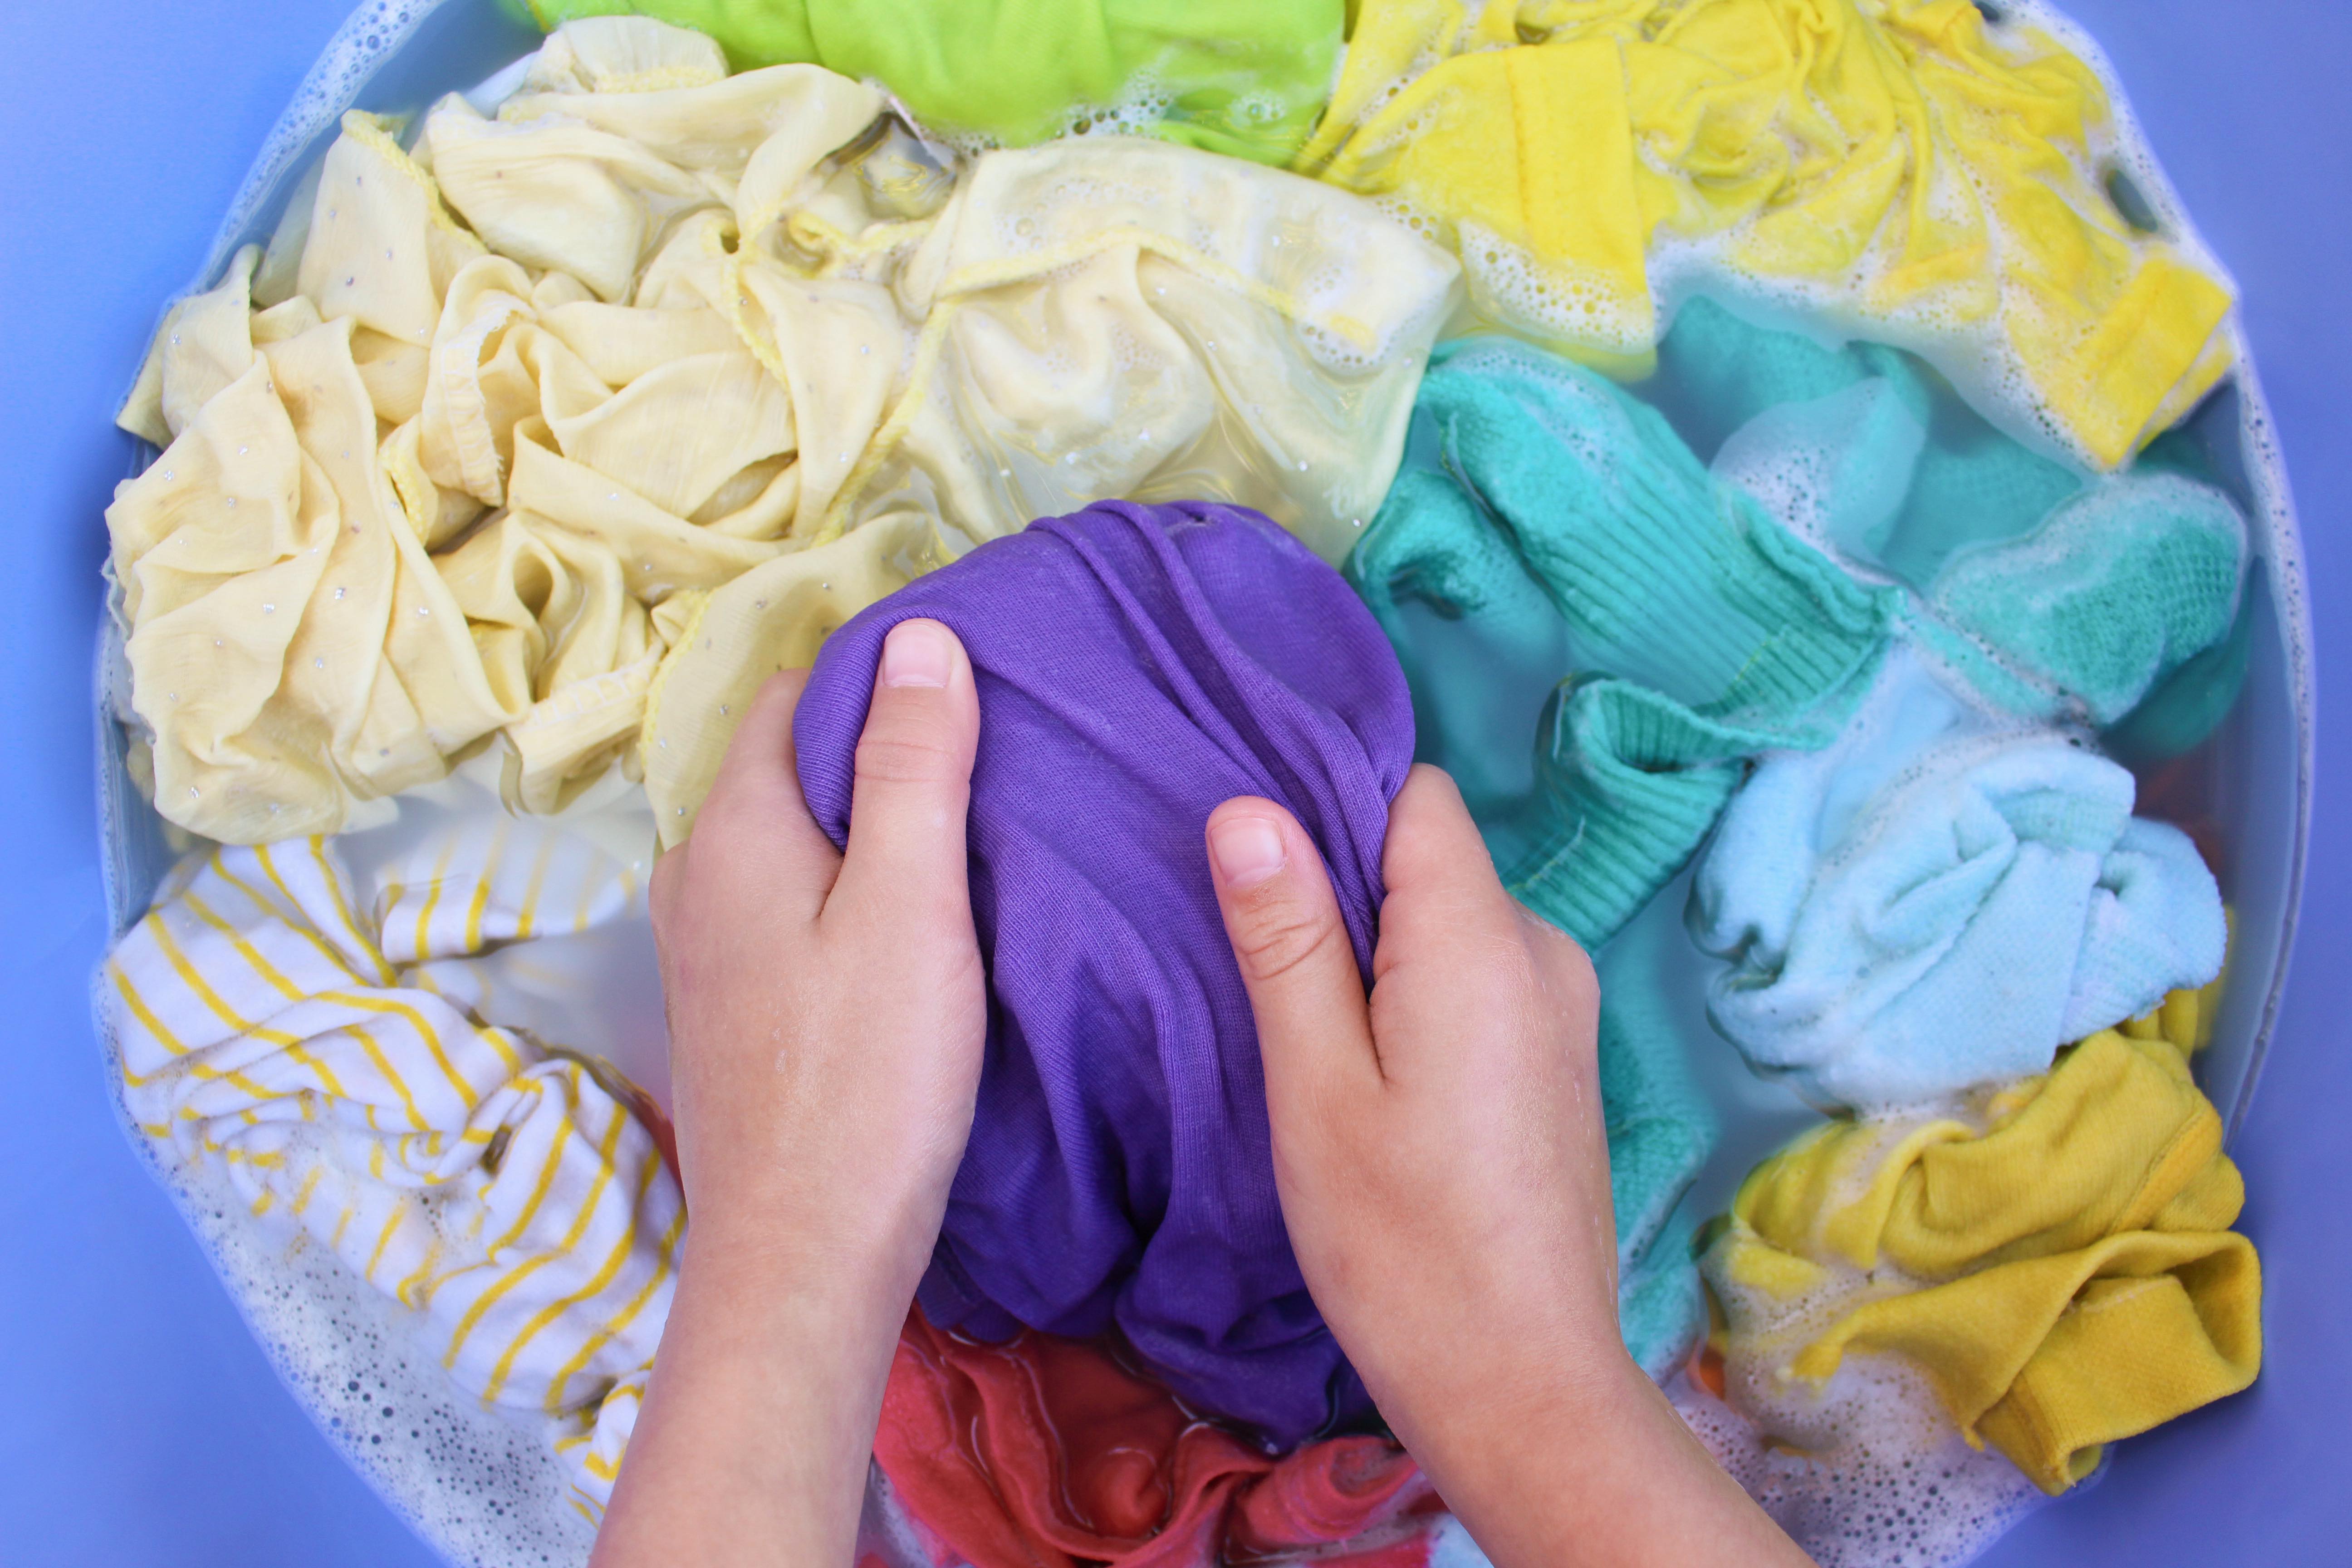 How to Remove Coloring Washed into Clothes: Whites & Colors